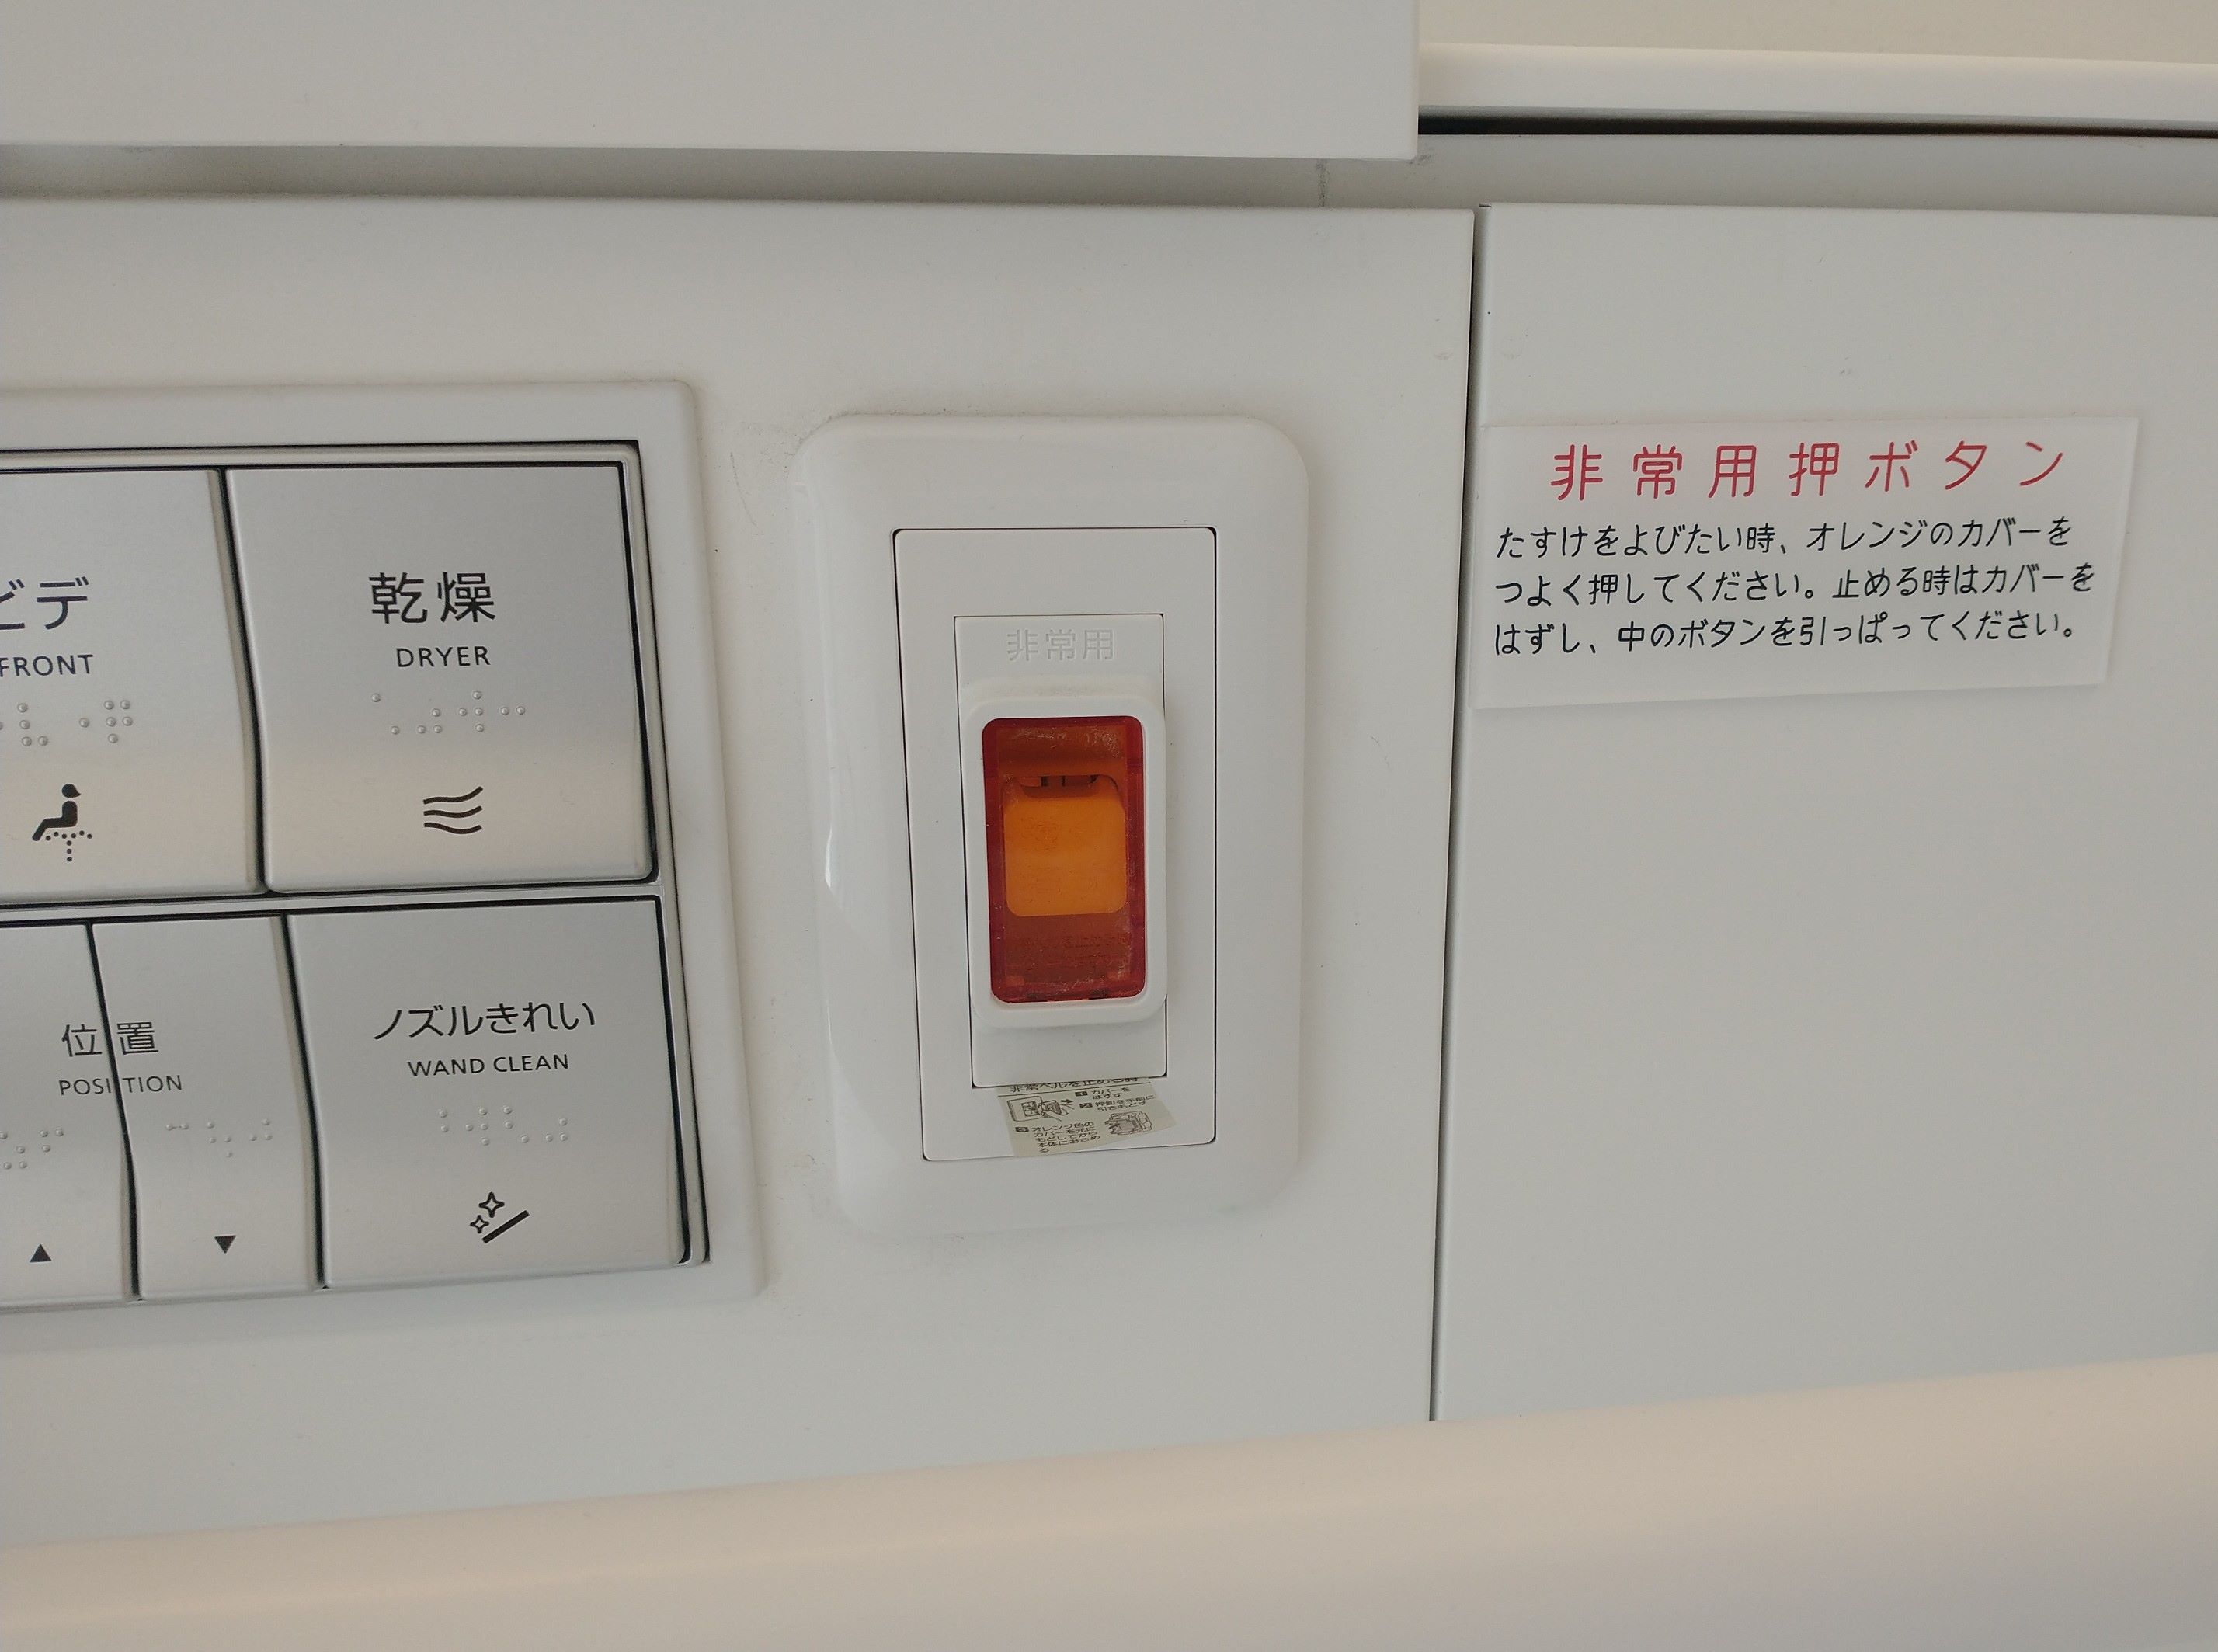 Example of emergency button